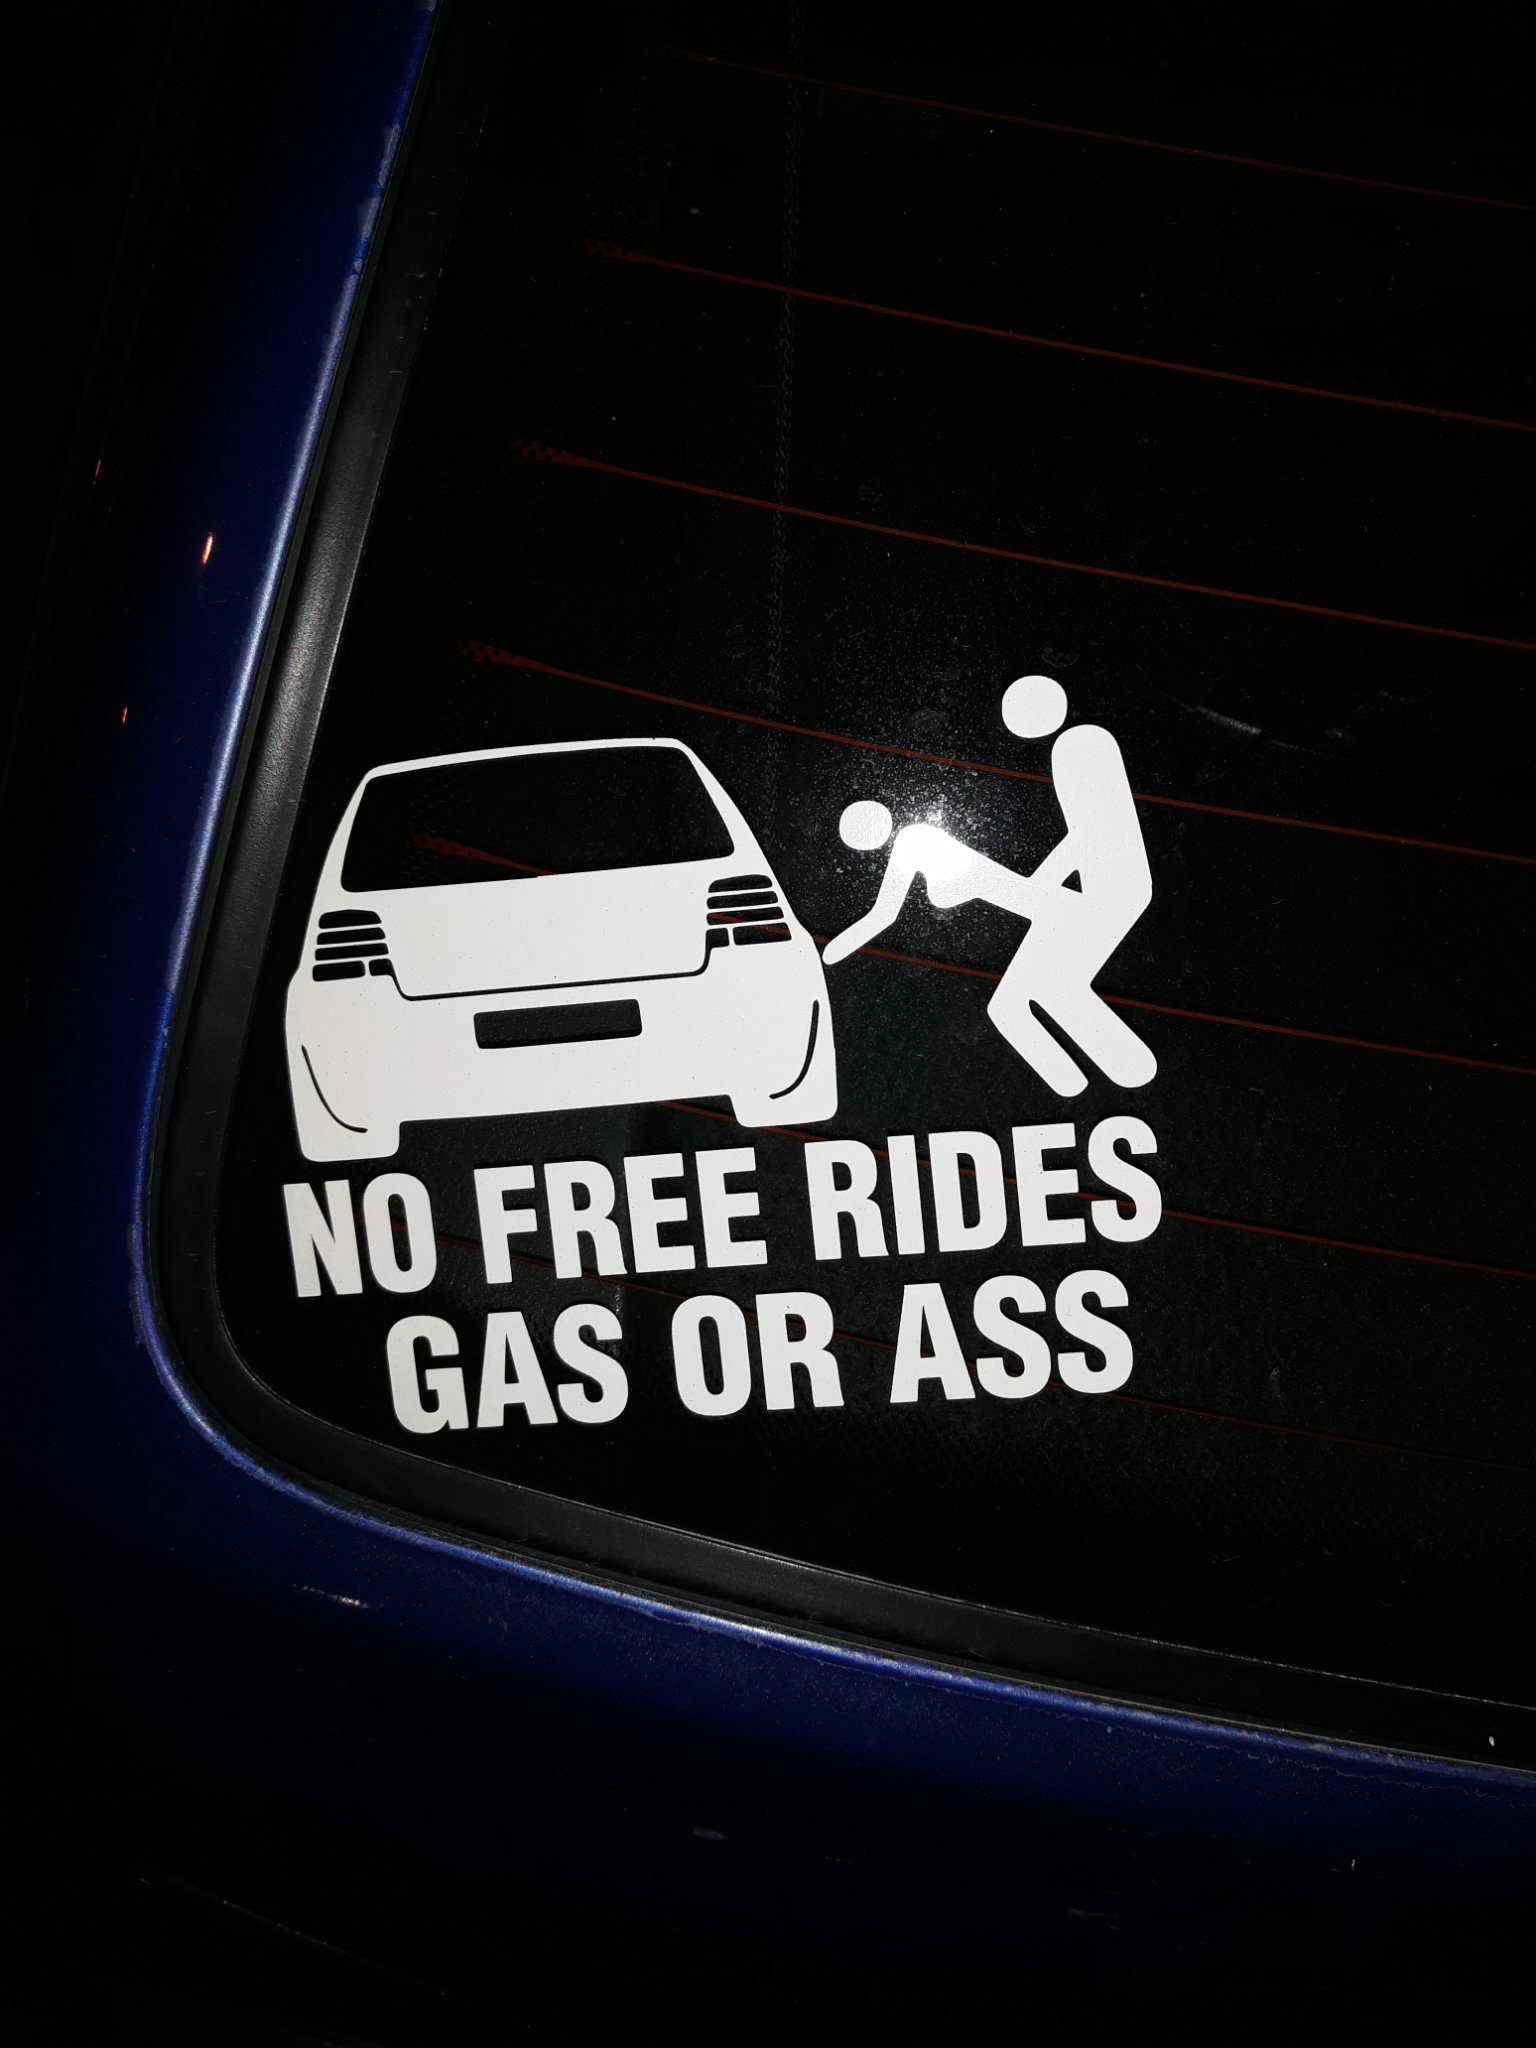 No free rides gas or ass funny car decal vinyl sticker for window bumper panel